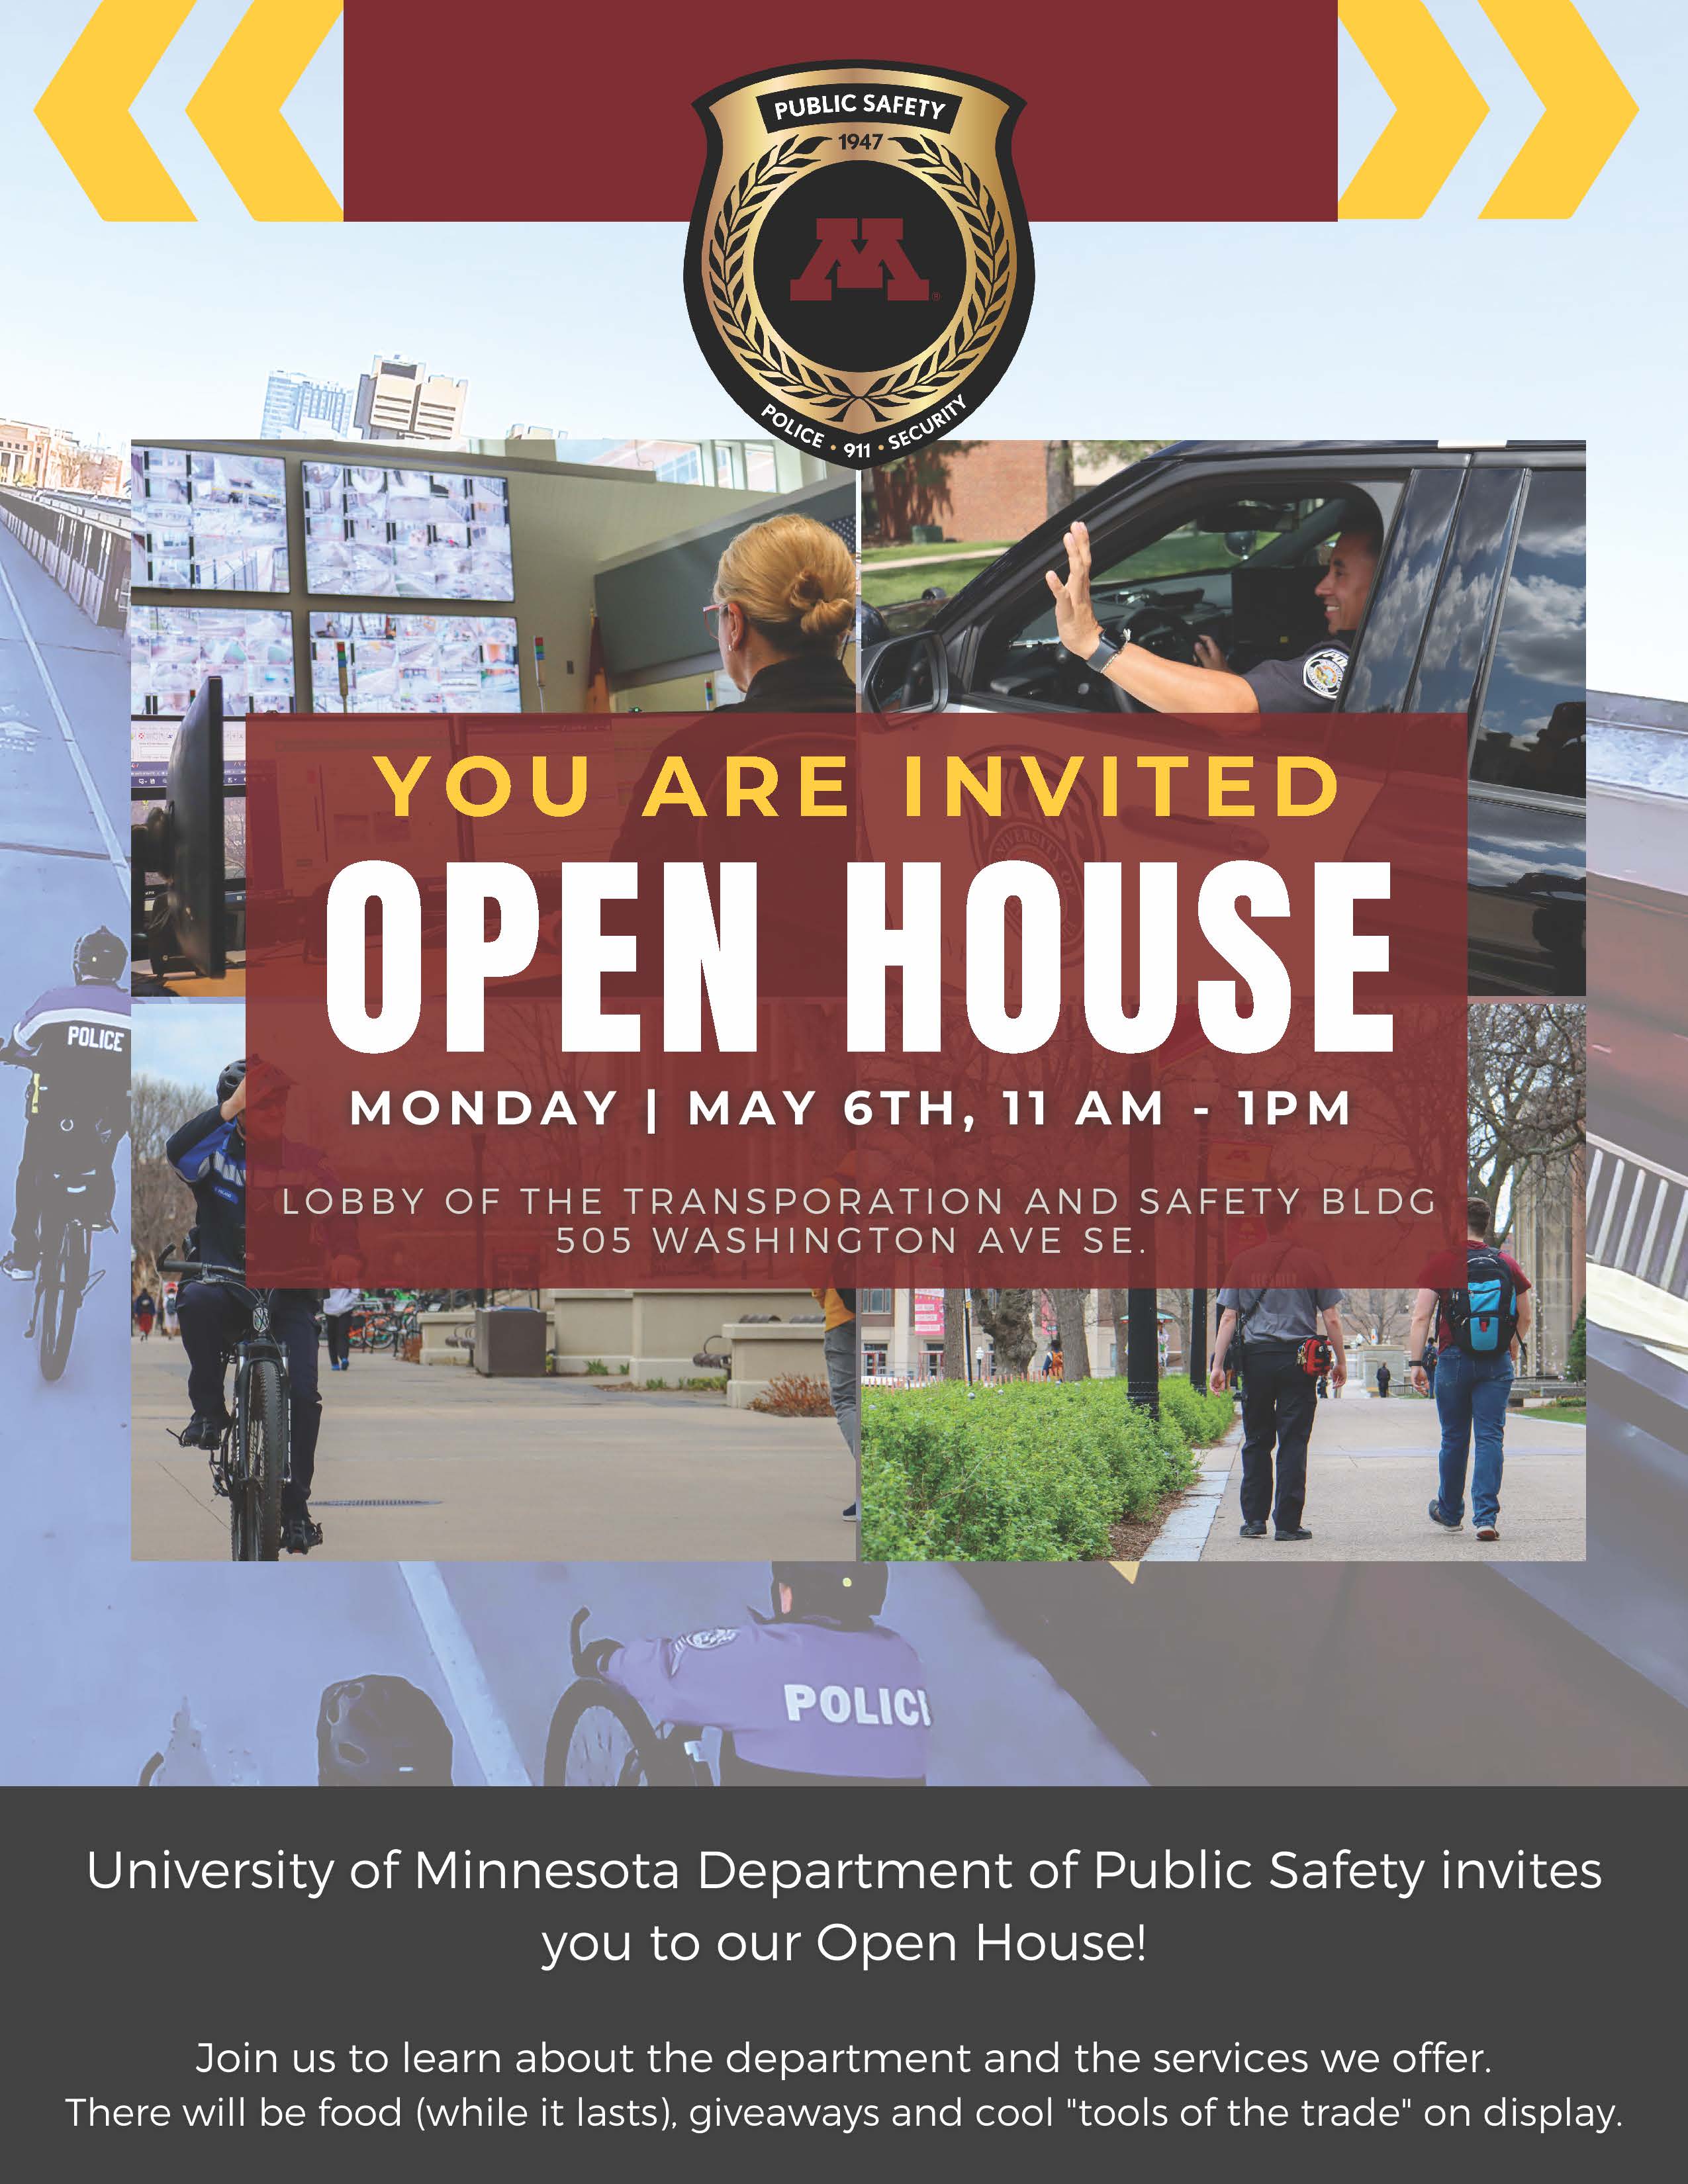 DPS Open House on Monday, May 6 from 11 am to 1 pm